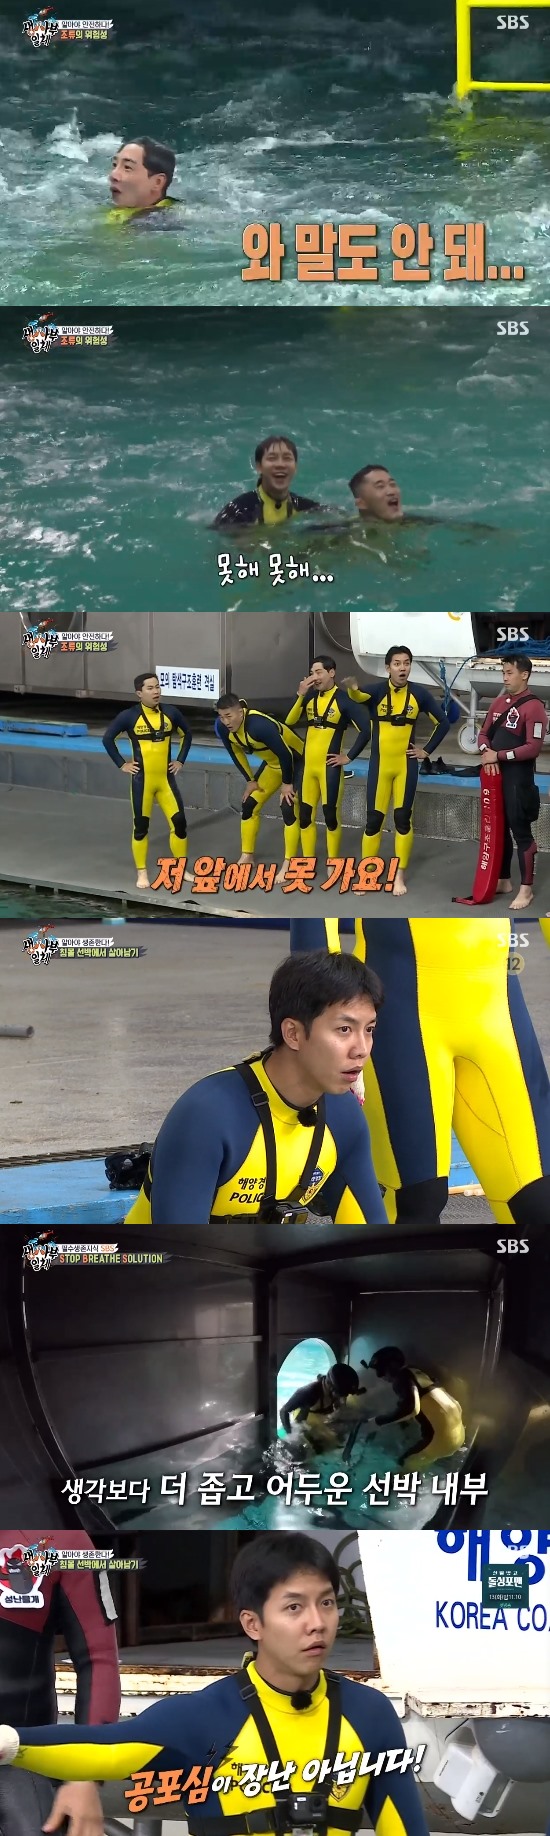 On SBS All The Butlers broadcast on the 4th, Lee Seung-gi, Yang Se-hyeong, Kim Dong-Hyun and daily student Park Gun were trained to cope with the birds, waves and Ian-ri accidents in the summer water to four masters of the Korea Coast Guard Education Center.Last week, if self-Earth 2 was a law, this time I studied Earth 2 to save others with their safety guaranteed. Many marine accidents are caused by birds.The tide was not as visible as the waves, but the water was a crazy flutter. The members were surprised to see the birds directly with their eyes.Lee Seung-gi wanted to experience it directly in the water; Kim Dong-Hyun, who came out of the Marine Corps, was the first to obtain it.Kim Dong-Hyun seemed to be going through the current at the beginning, but from the time he was halfway there he was still in his place no matter how he swam.Special Warrior Lee Seung-gi followed with Top Model.Lee Seung-gi went farther than Kim Dong-Hyun, but was blocked by the birds and could no longer Jun Jin; so was Park Gun.Kim Dong-Hyun and Lee Seung-gi gave up, Its not easy, I cant, and then surprised, I didnt know the birds were so scary, Im dizzy.Then, the masters rescue swimming demonstration was carried out. The golden time of the drowning accident was 4 minutes.Master Korea Coast Guard fixed his gaze on the drowning water in the rough tide and succeeded in the rescue of the drowning water in an instant, Jun Jin through the tide like a seal.The members also played the role of rescuer to save the drowning in the Golden Time in 4 minutes. Lee Seung-gi, who had to save the drowning Yang Se-hyeong.Lee Seung-gi went strong at the beginning, but could not move on, twisting the life tube into a strong tide.Lee Seung-gi said, Im sorry for my brother. He hugged the life tube and laughed at his busy life.Although he finished with a laugh, Lee Seung-gi expressed his respect for the masters, saying, It is really... to rescue others.The masters expressed their extraordinary sense of responsibility and mission, saying, When I rescue, I can not think of tough because of my thoughts about structure.The second was to learn how to escape from the sinking ship using a simulator that reproduced the inside of the ship.The rate of ferry accidents is not high, but it was important because once an accident occurs, it leads to a very big accident.Members top Model to escape from a ship filled with water to the neck.First, Top Model Yang Se-hyeong and Park Gun under the masters companionship.Yang Se-hyeong said, I think the fear of the lungs is coming, and Park Gun was afraid before the start, saying, Its scary, its fear.And the water quickly filled up to his throat: Park Gun and Yang Se-hyeong overcame their fears and managed to escape.How scary would it be if it were a real situation, said Lee Seung-gi, who watched from outside.After the escape success, Yang Se-hyeong and Park Gun said: It was really scary, I was embarrassed because there were obstacles, it was a really new experience.Finally, I learned to survive on the sea. The members boarded a sloping, hypothetical ship, an experience of how my body reacted to the tilt of the ship.Lee Seung-gi was greatly embarrassed by the fact that the seasickness is coming, it is so scary, the sorum is causing: it was only about 20 degrees tilted, but if it was a real situation, all the things around it would have been poured out.In addition, the members did not walk properly.The actual escape went ahead: Lee Seung-gi was amazed at the stretch, saying: I cant control, Im sweating so much.Especially in the process of getting out of the boat and going to the life raft, Special Warrior was noticed by Lee Seung-gi and Park Gun.The two men attracted attention by reorganizing the life raft that jumped out of the dizzying high boat without hesitation and turned over.And next week, in the preliminary video, actor Yoo Soo-bin got off as a new member of Shin Sung-rok and Cha Eun-woo.Photo: SBS broadcast screen